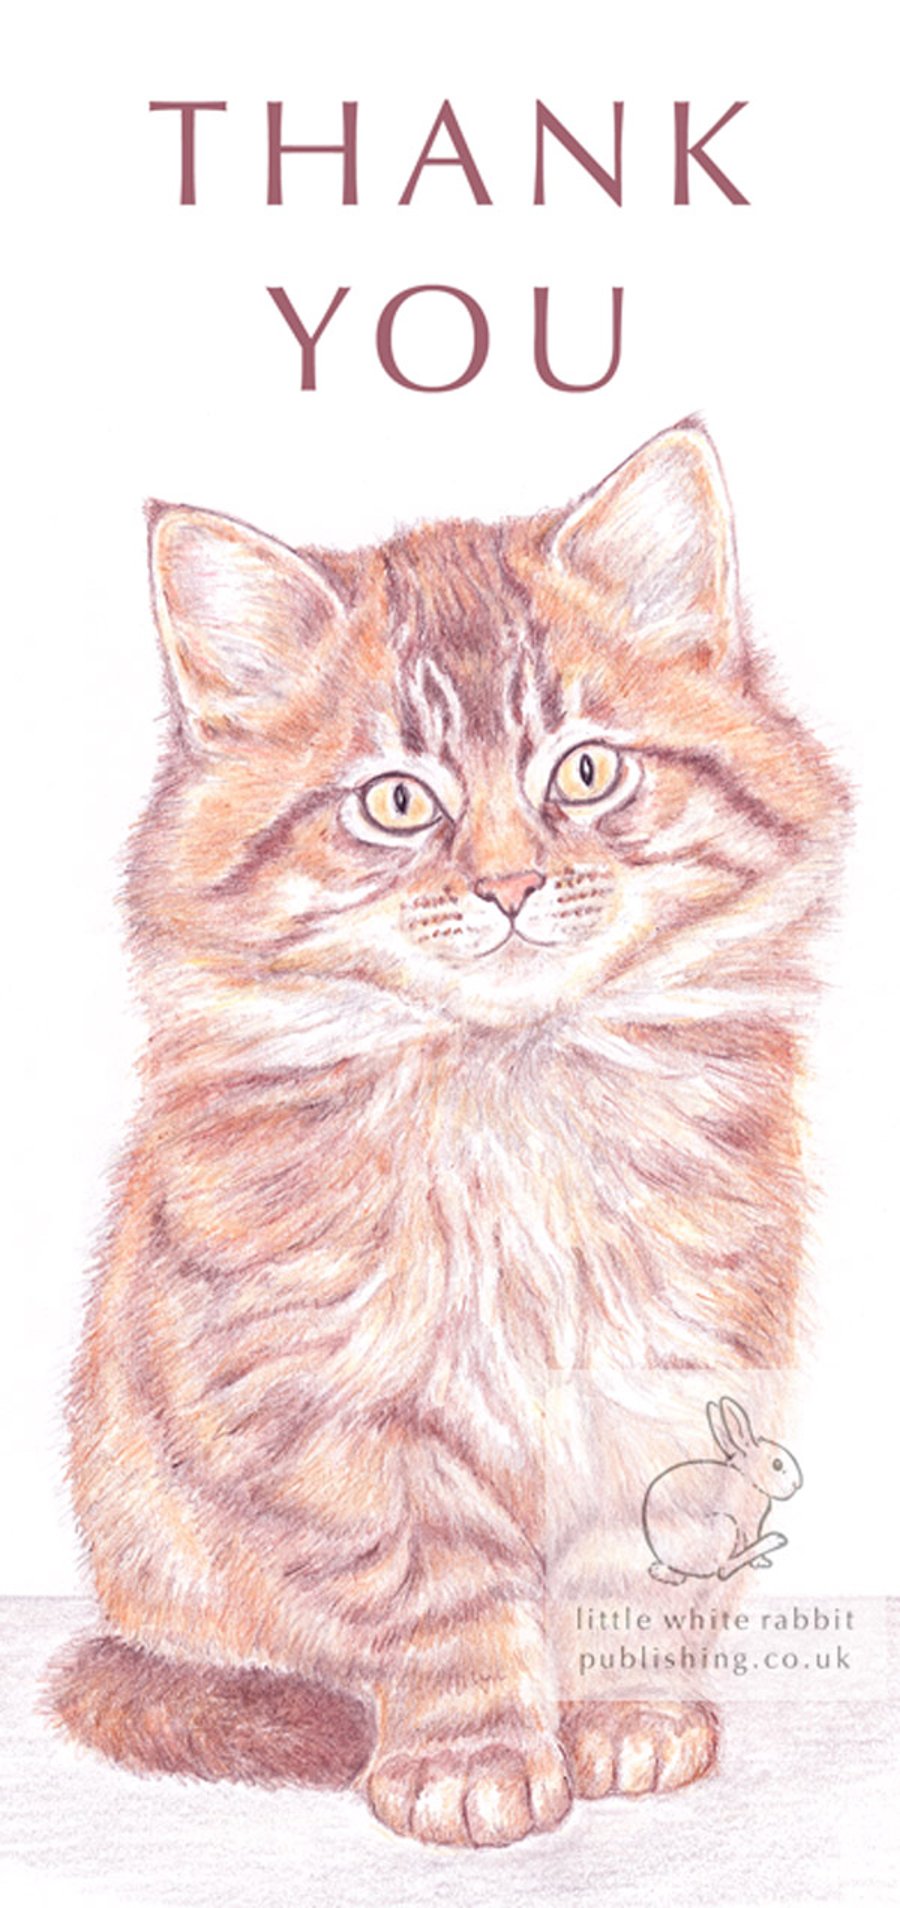 Moppet the Kitten -  Thank You Card